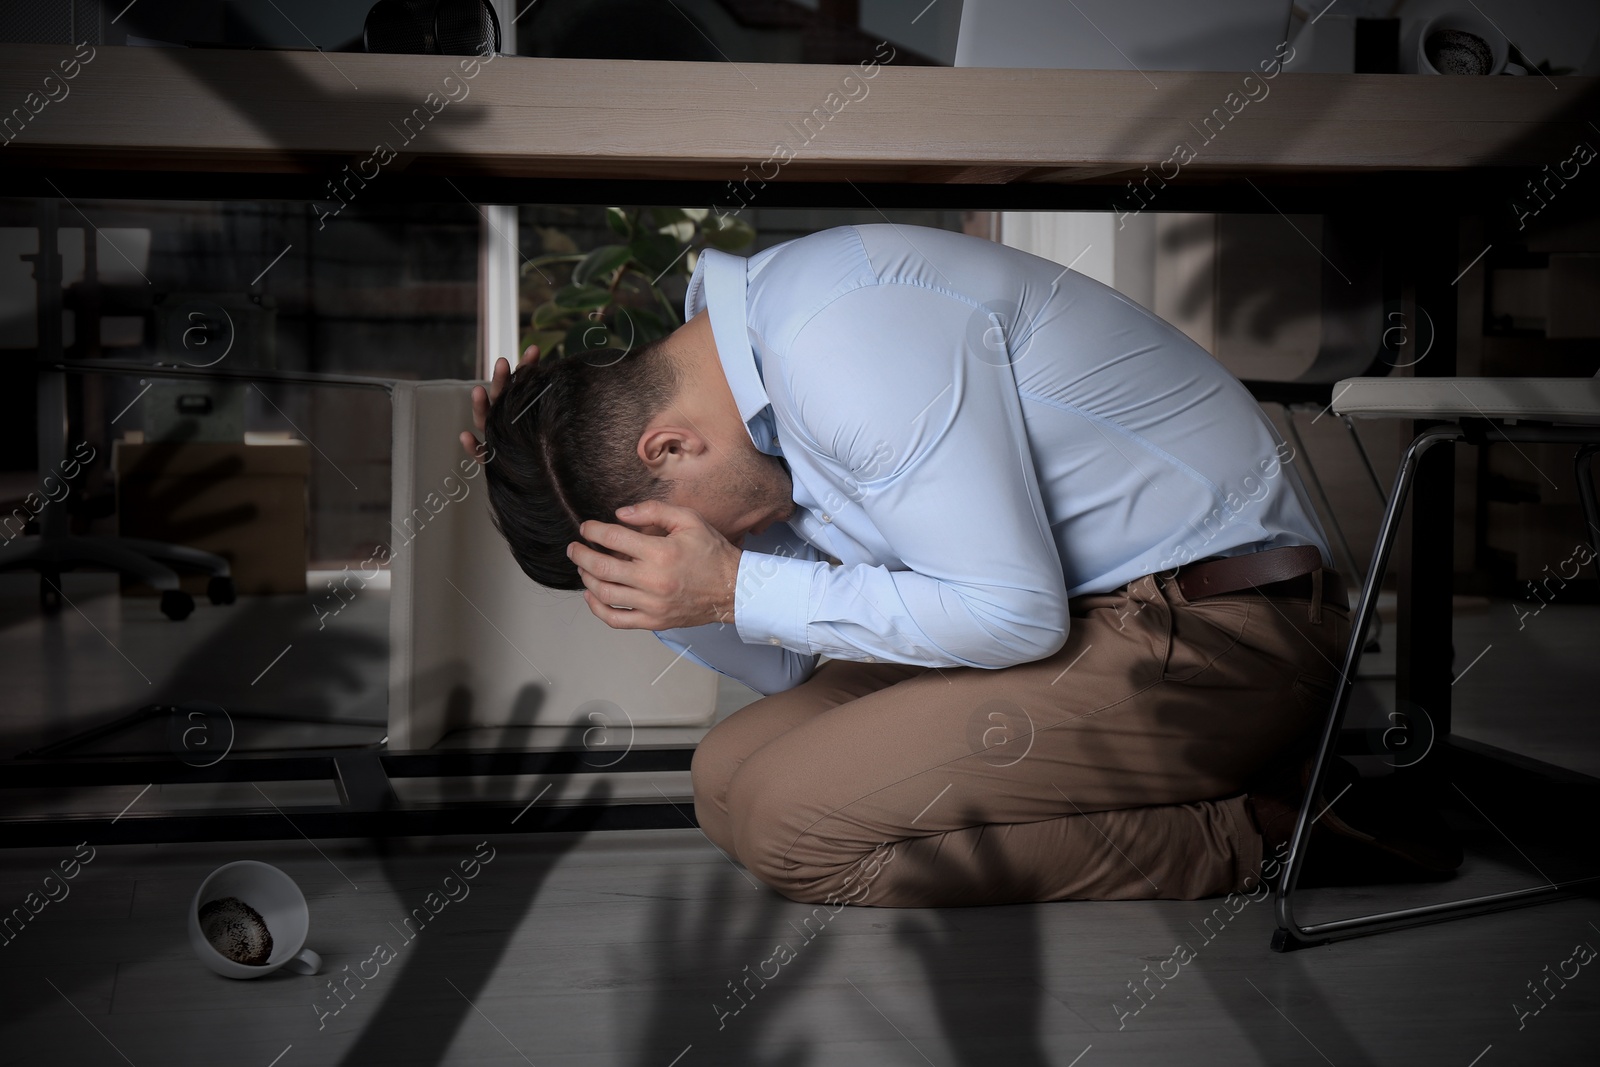 Image of Paranoid individual. Scared man hiding under desk and having delusion as hands reaching for him